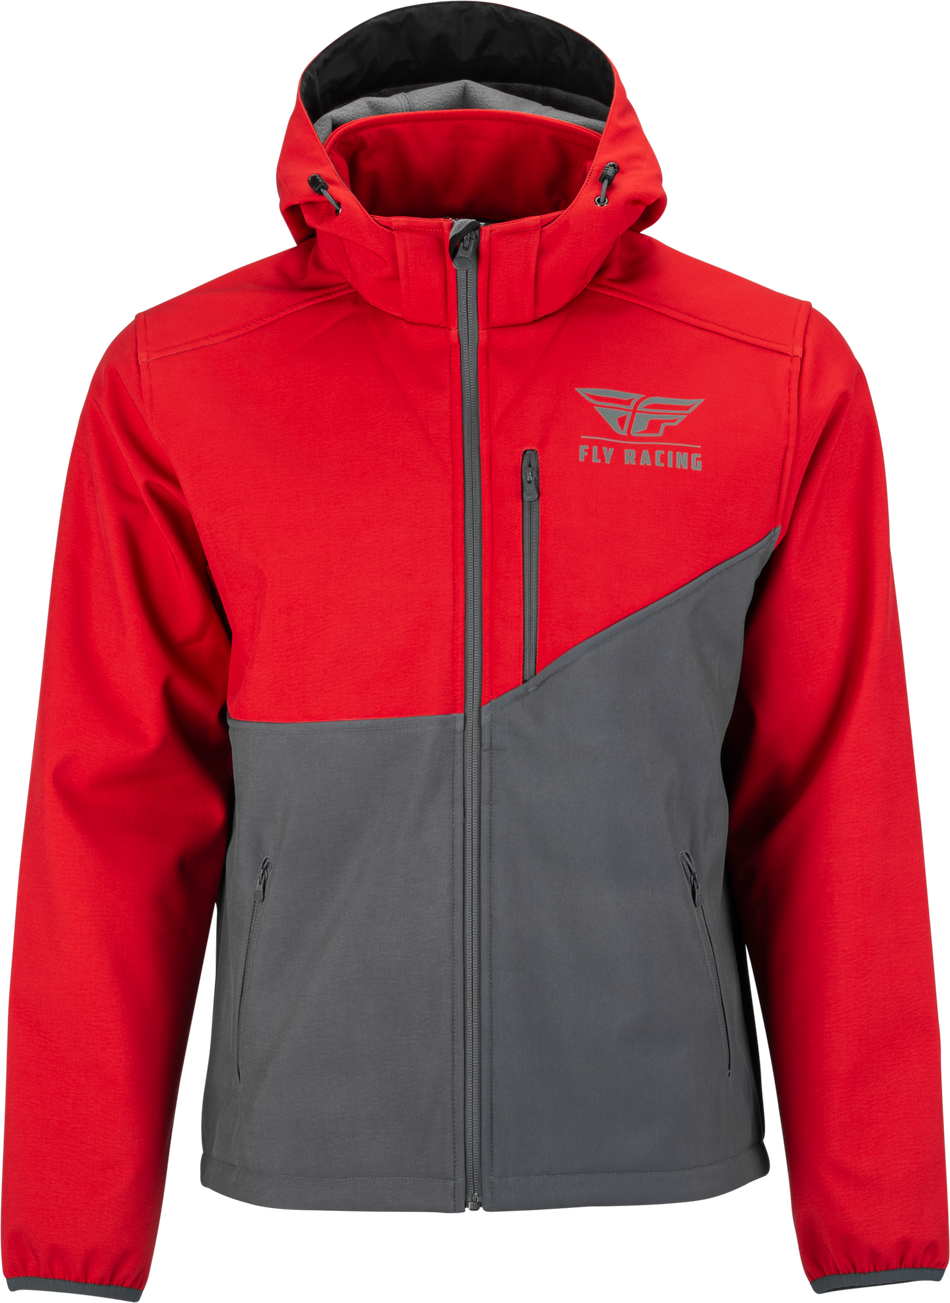 FLY RACING Checkpoint Jacket Grey/Red Sm 354-6384S